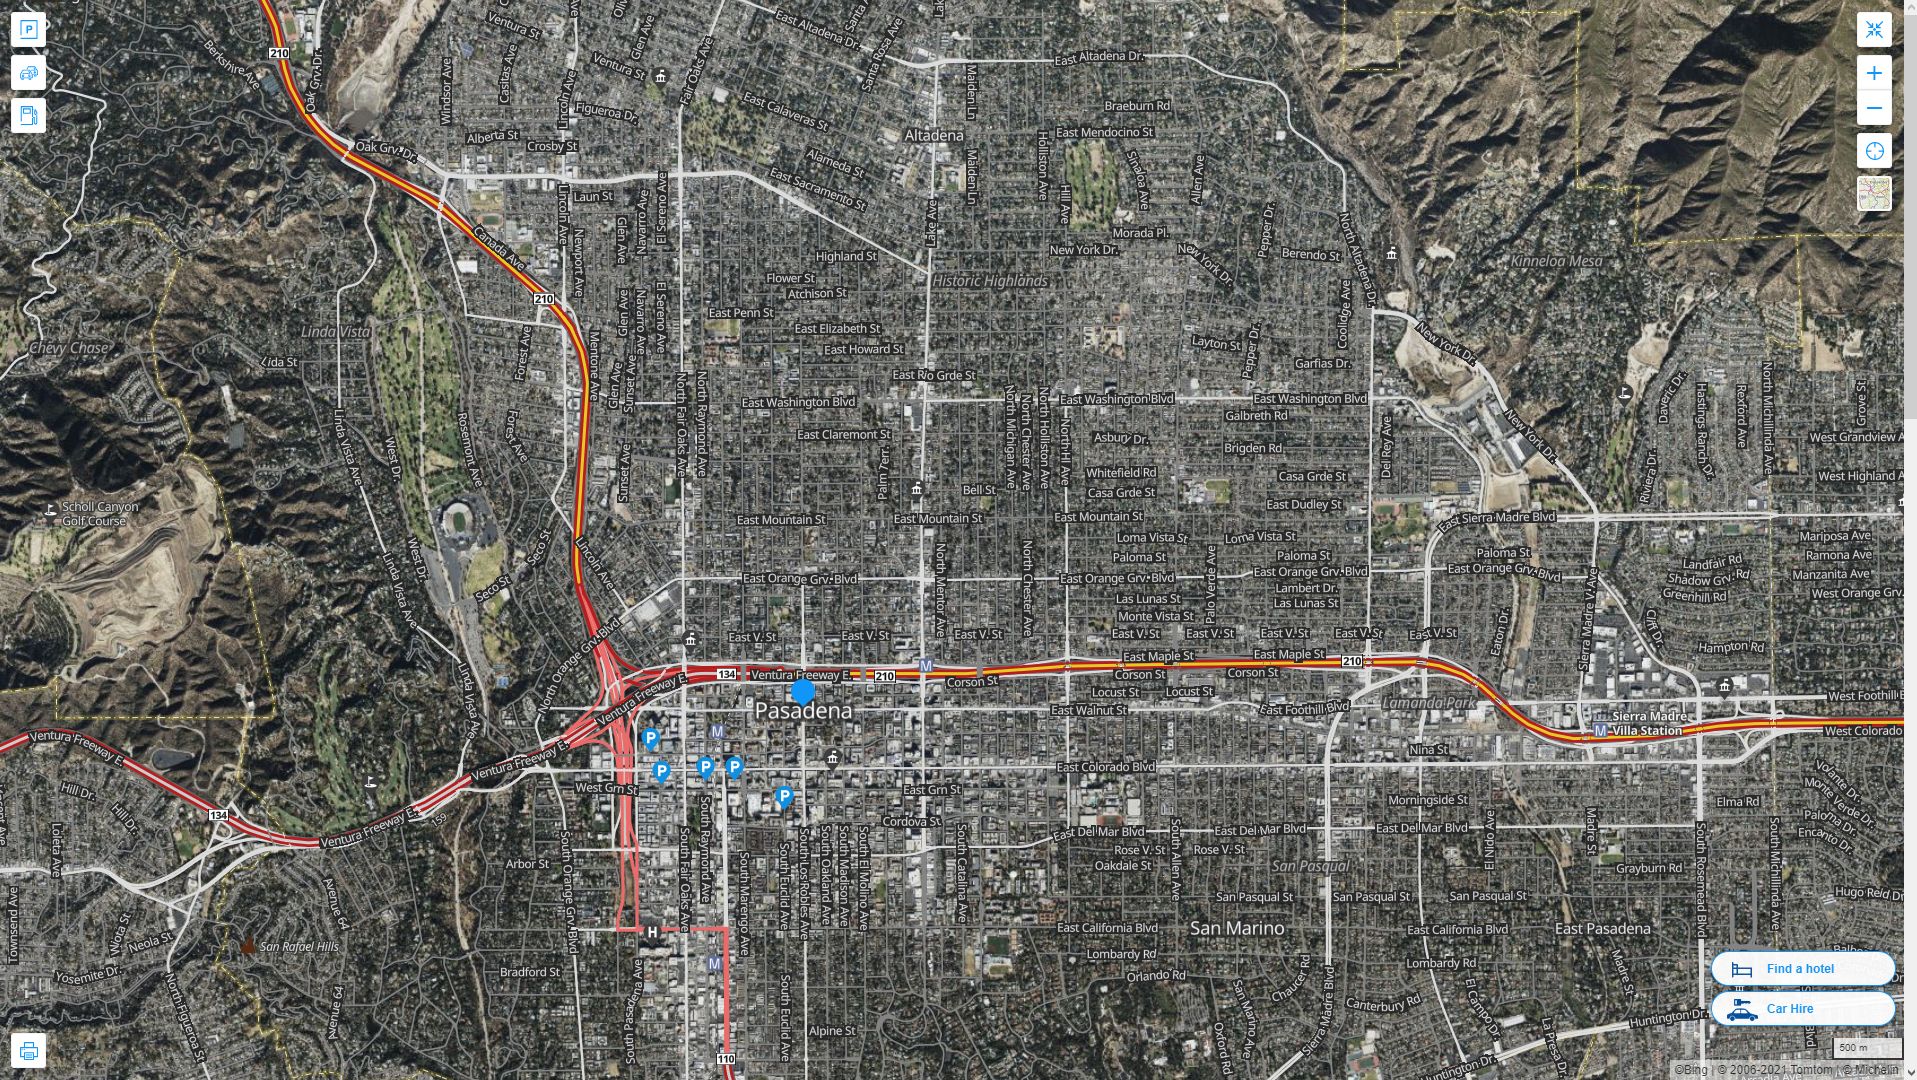 Pasadena California Highway and Road Map with Satellite View